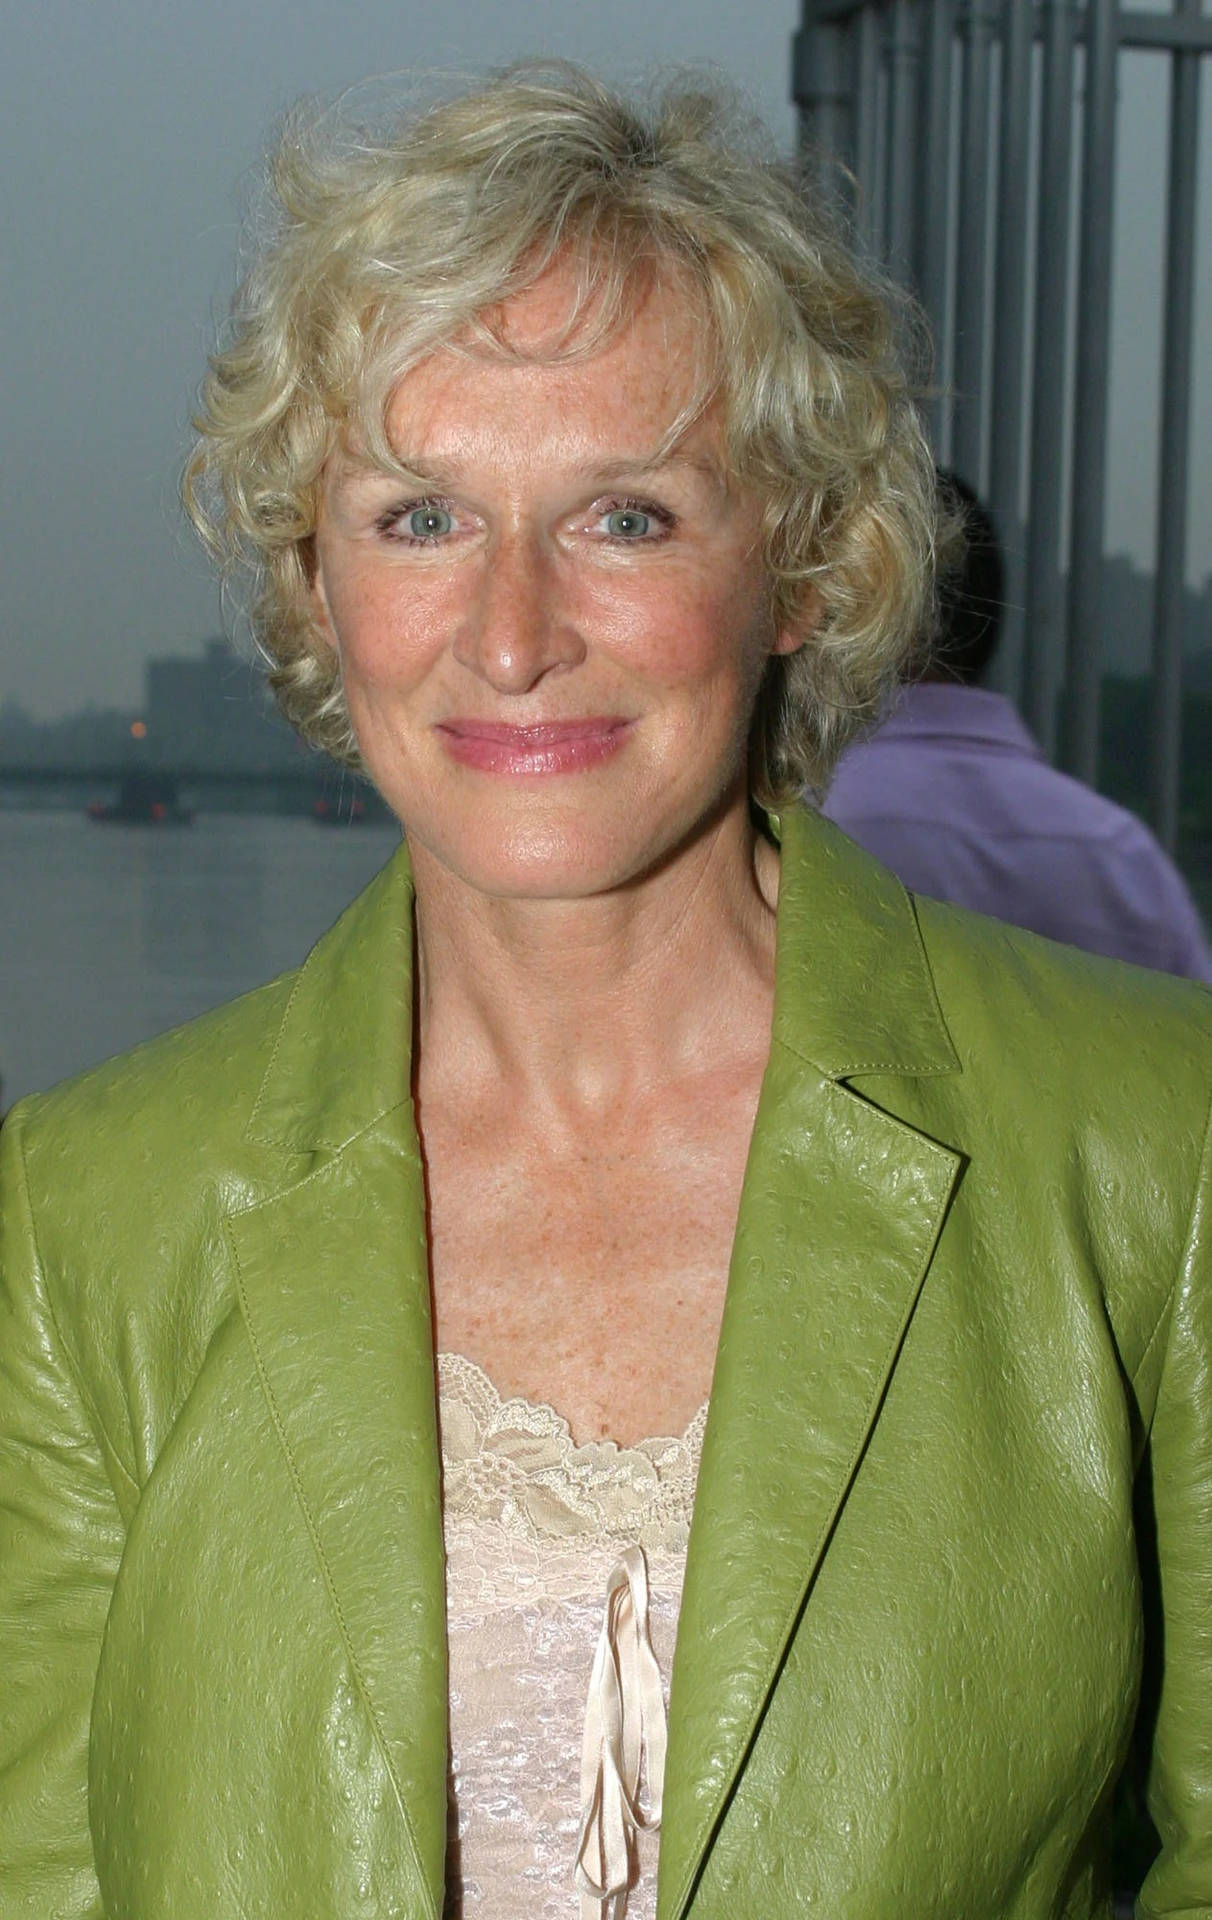 Acclaimed American Actress Glenn Close at an Exclusive Event Wallpaper